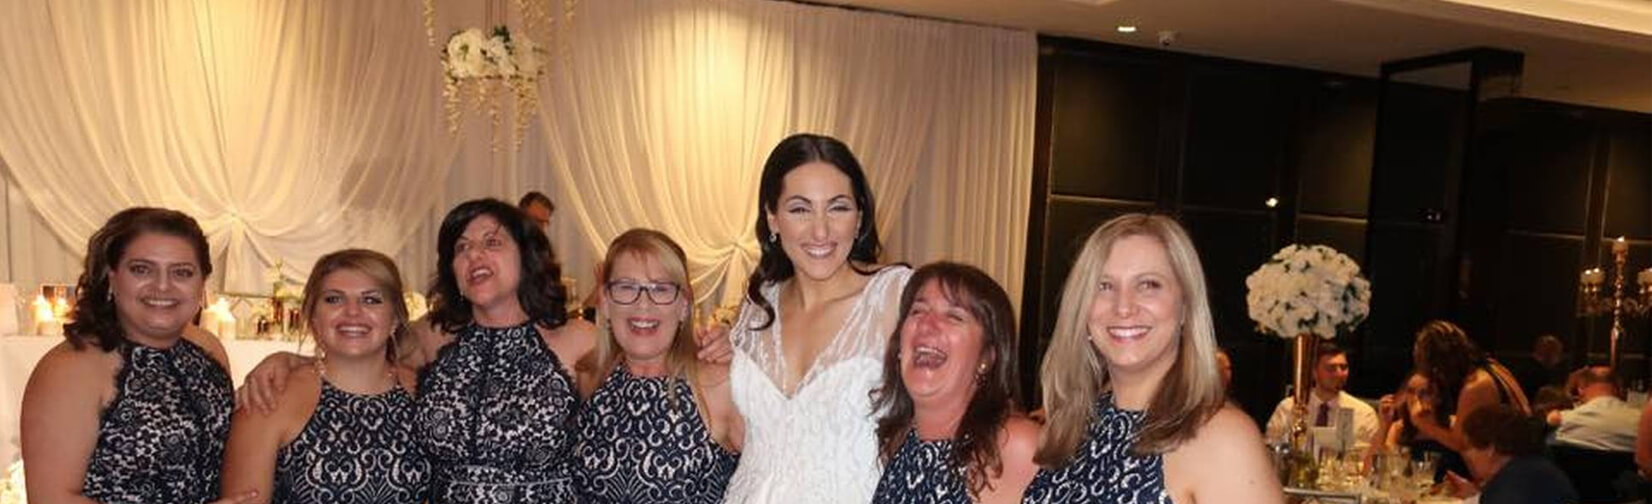 six women turned up to a wedding in the same dress